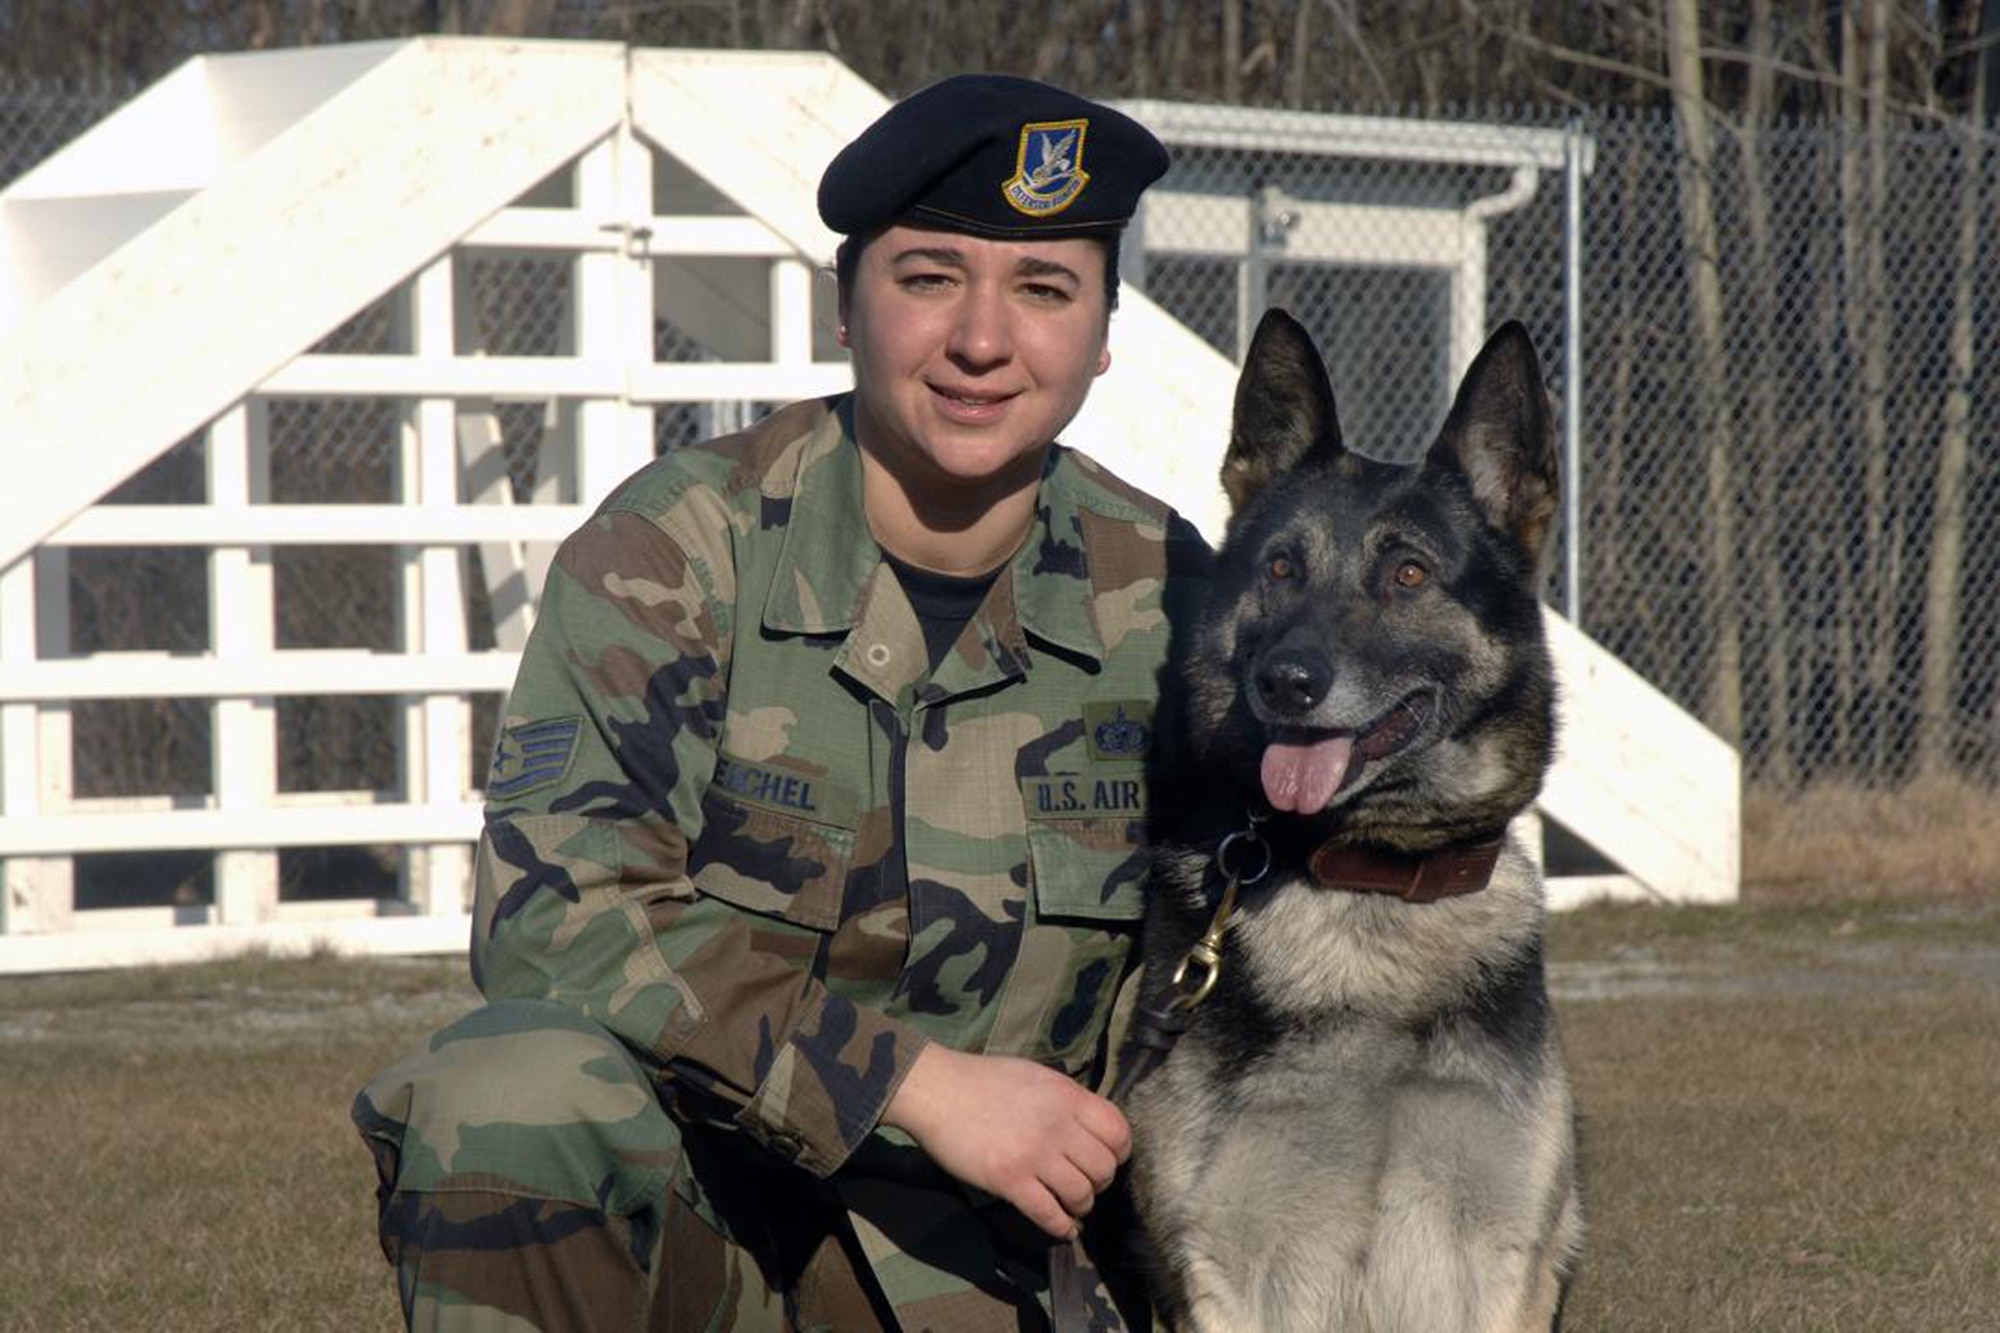 Staff Sergeant Jeanette Reichel, 66th Security Forces Squadron, poses with her Military Working Dog, Petya, a 6-year old German Sheppard, tattoo F-028. Sergeant Reichel entered the Hanscom history books on March 21 as the first female dog handler here in the past two decades after successfully completing her handler certification. (U.S. Air Force Photo by Linda LaBonte Britt)